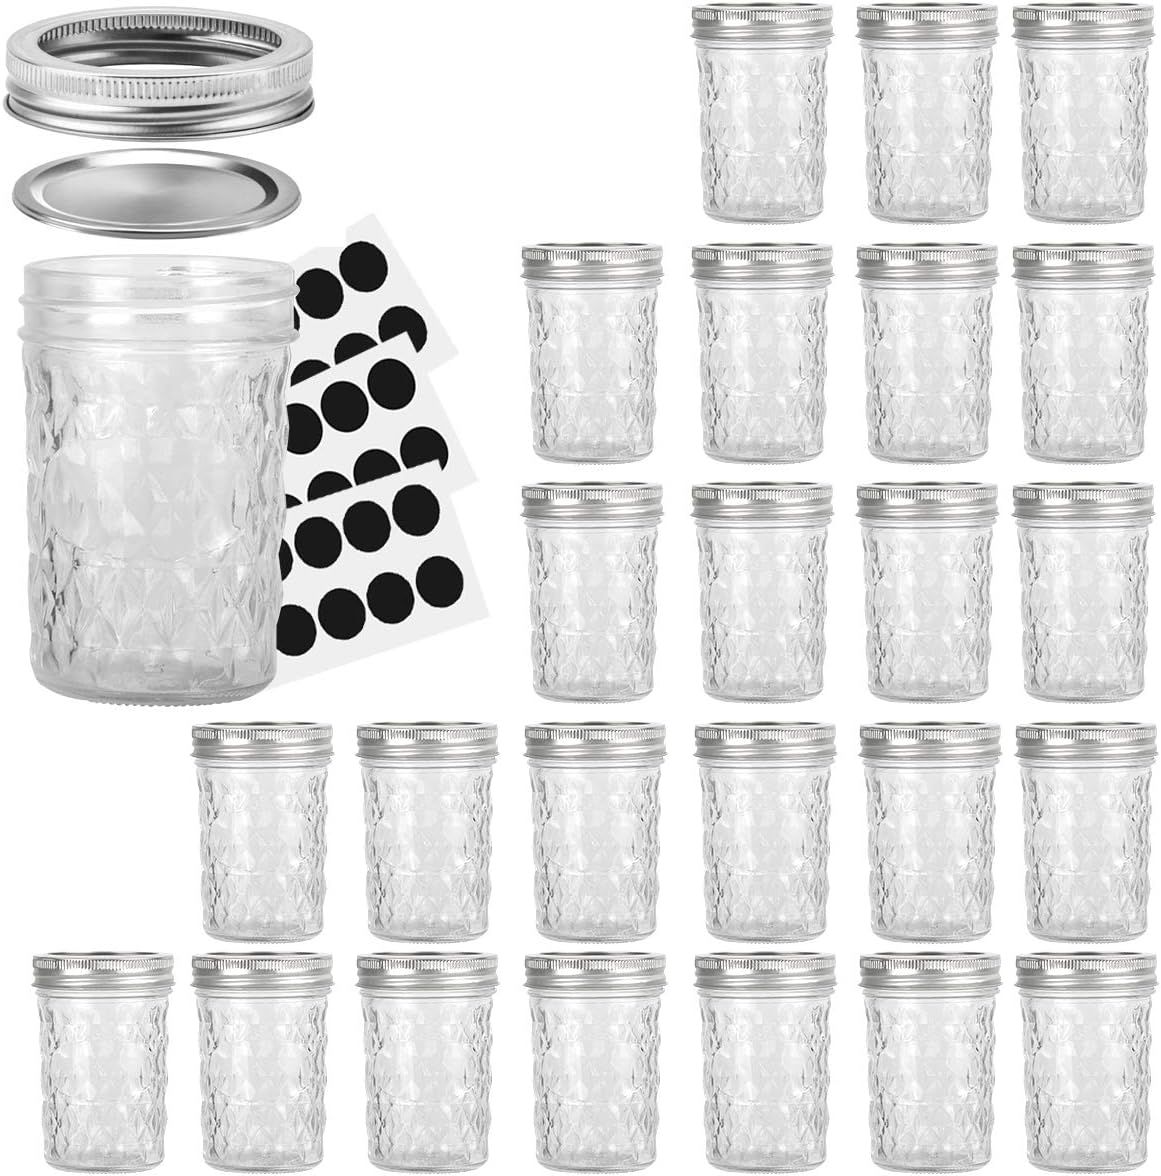 Mason Jars 8OZ, VERONES 8 OZ Canning Jars Jelly Jars With Regular Lids and Bands, Ideal for Jam, ... | Amazon (US)